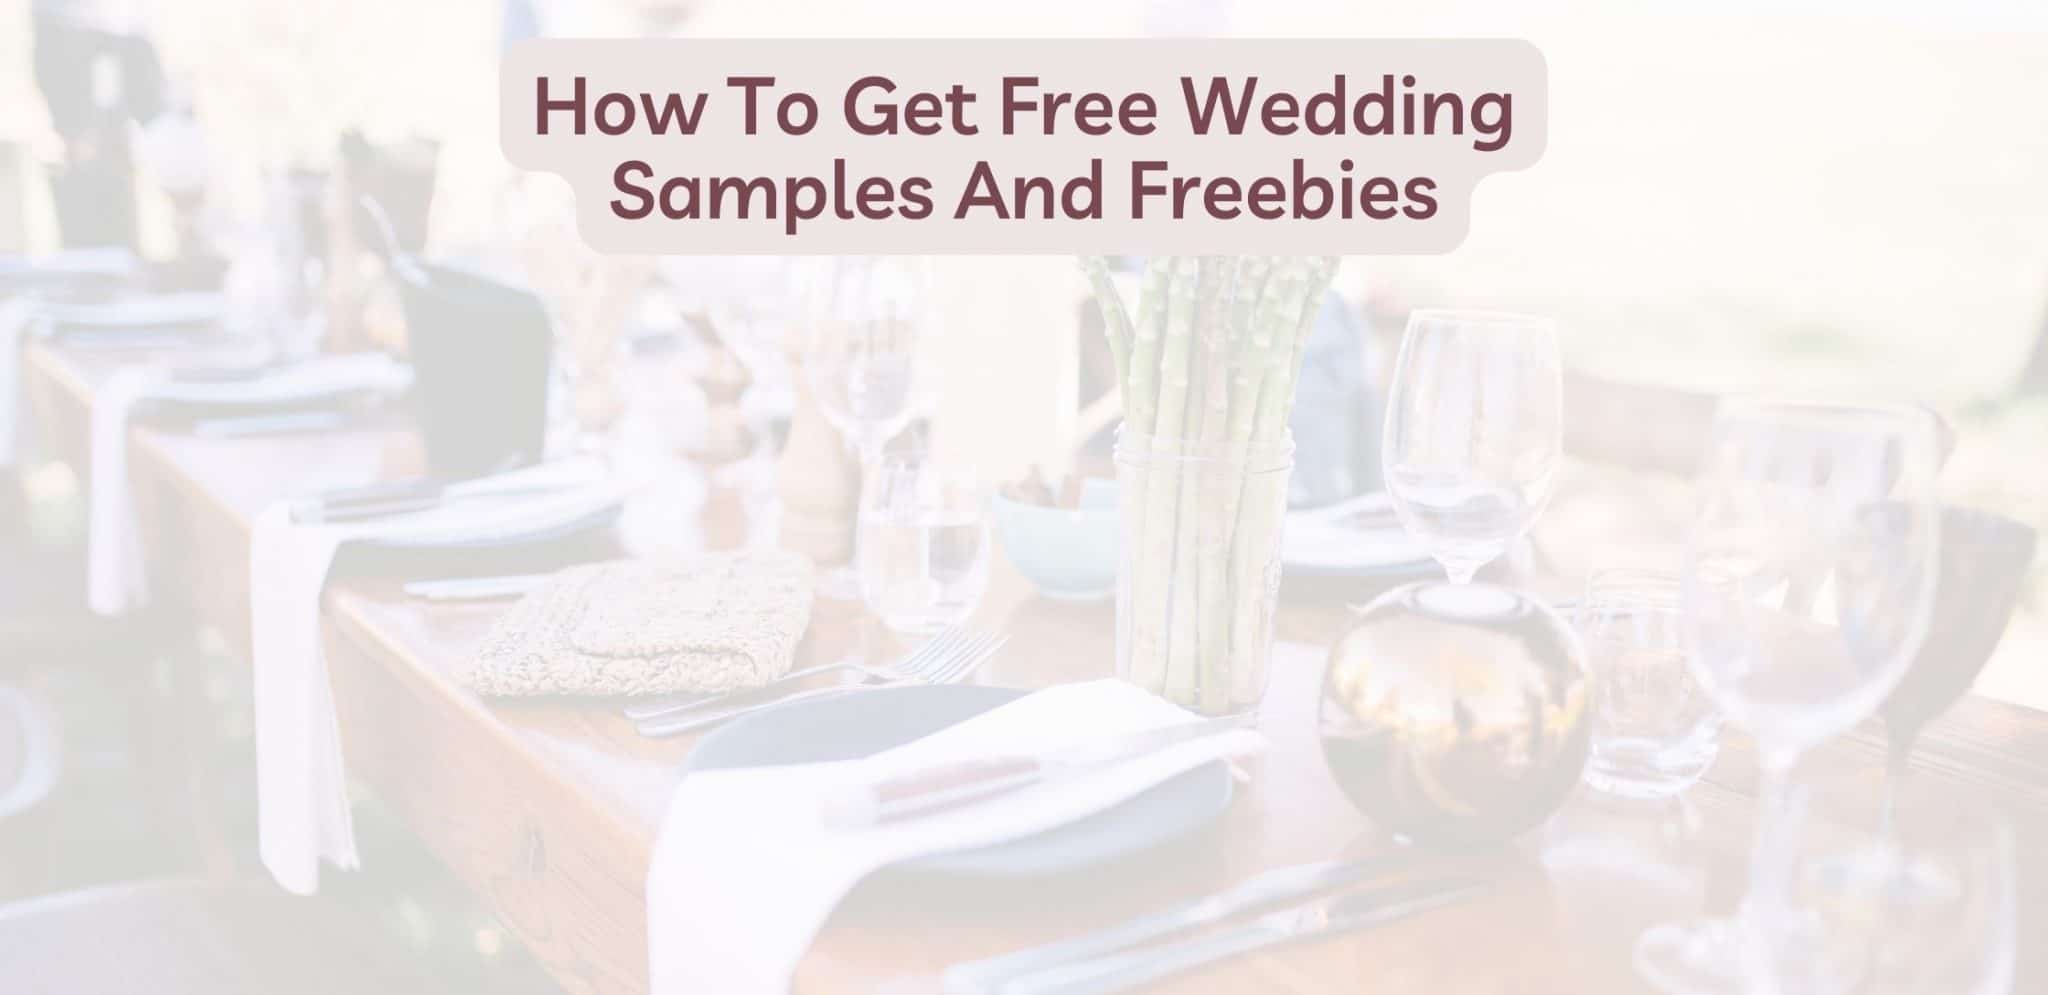 Where To Get Free Wedding Samples